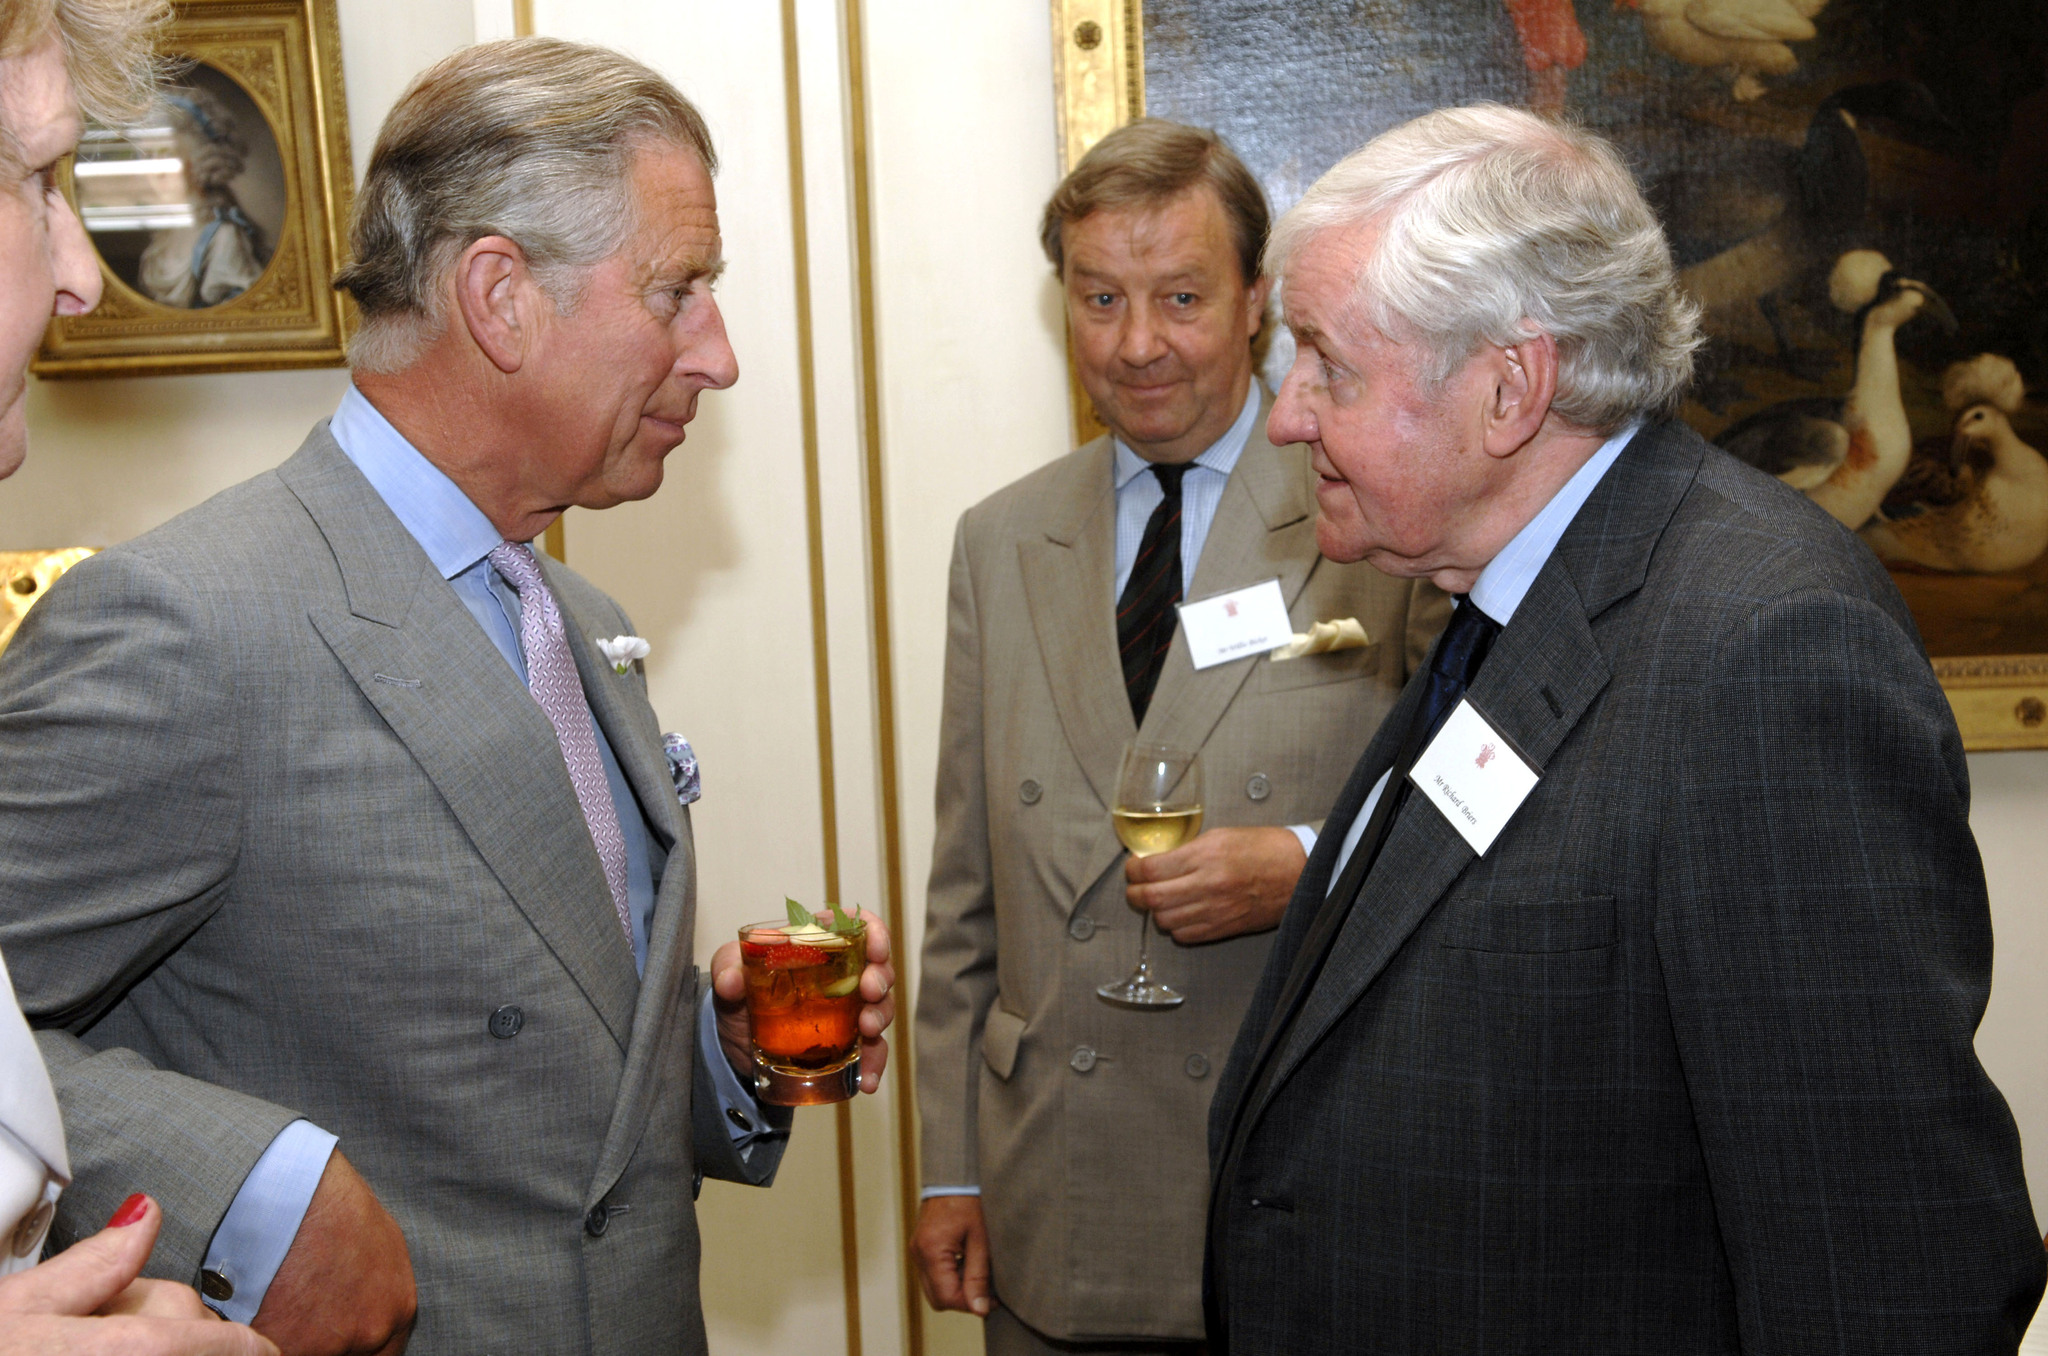 Richard Briers and Prince Charles